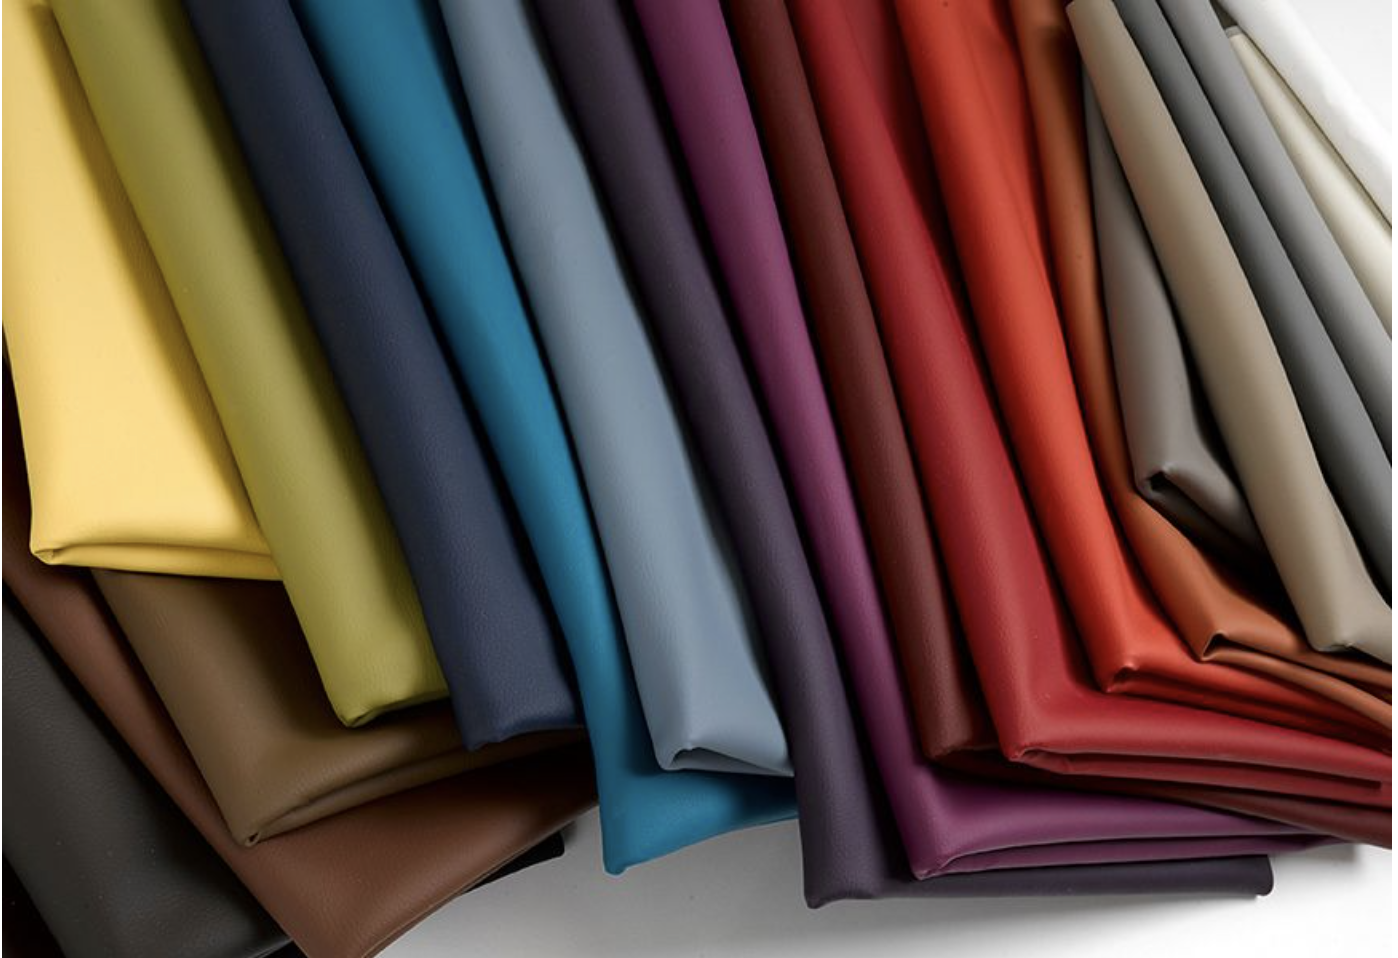 Leather Fabric: All About Leather Fabric